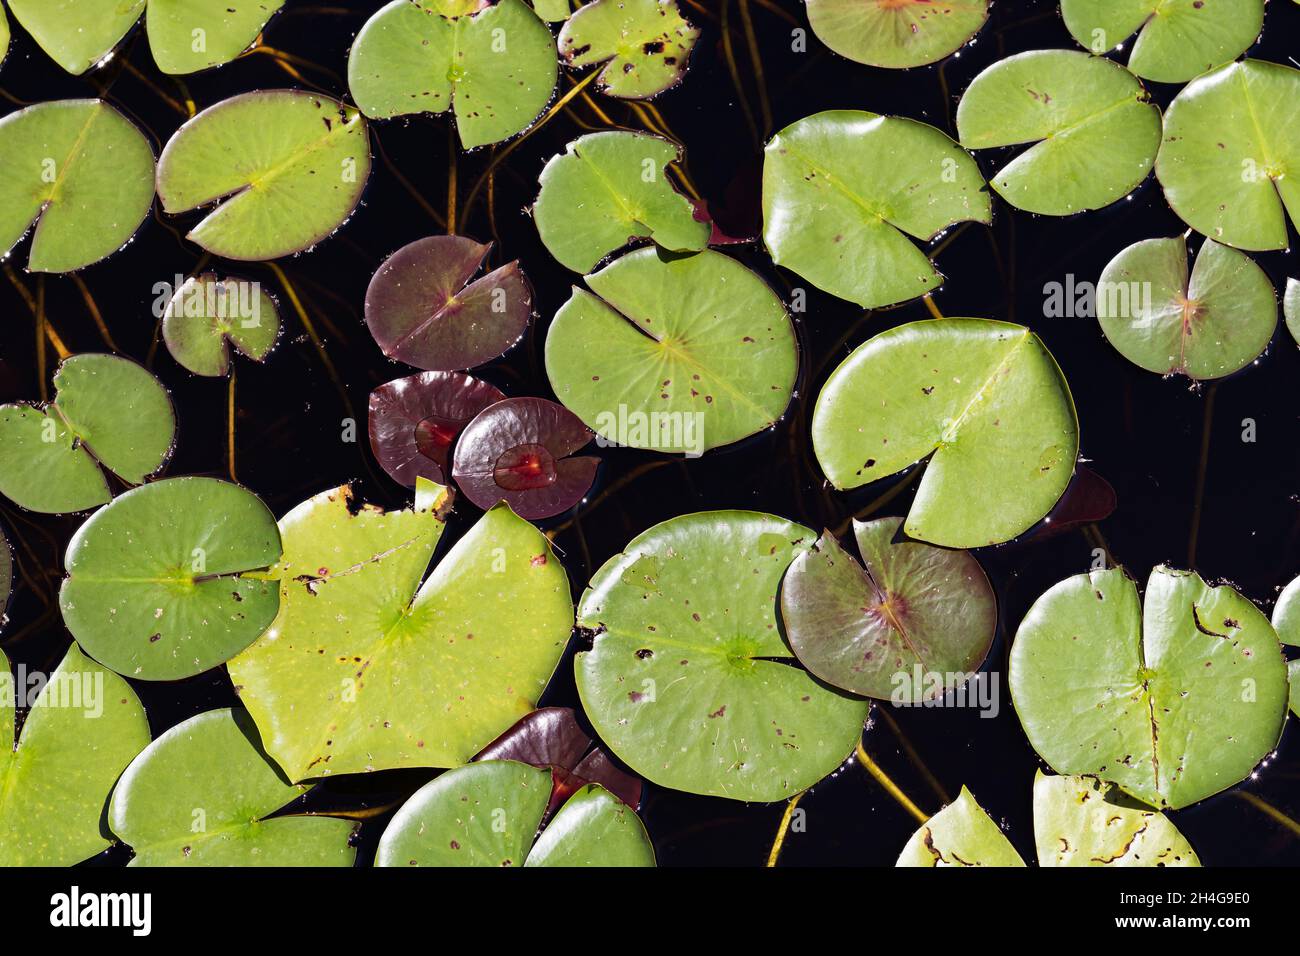 Green and red lily pads of the water lily plant - nymphaea - in dark pond water in Ontario, Canada. Stock Photo